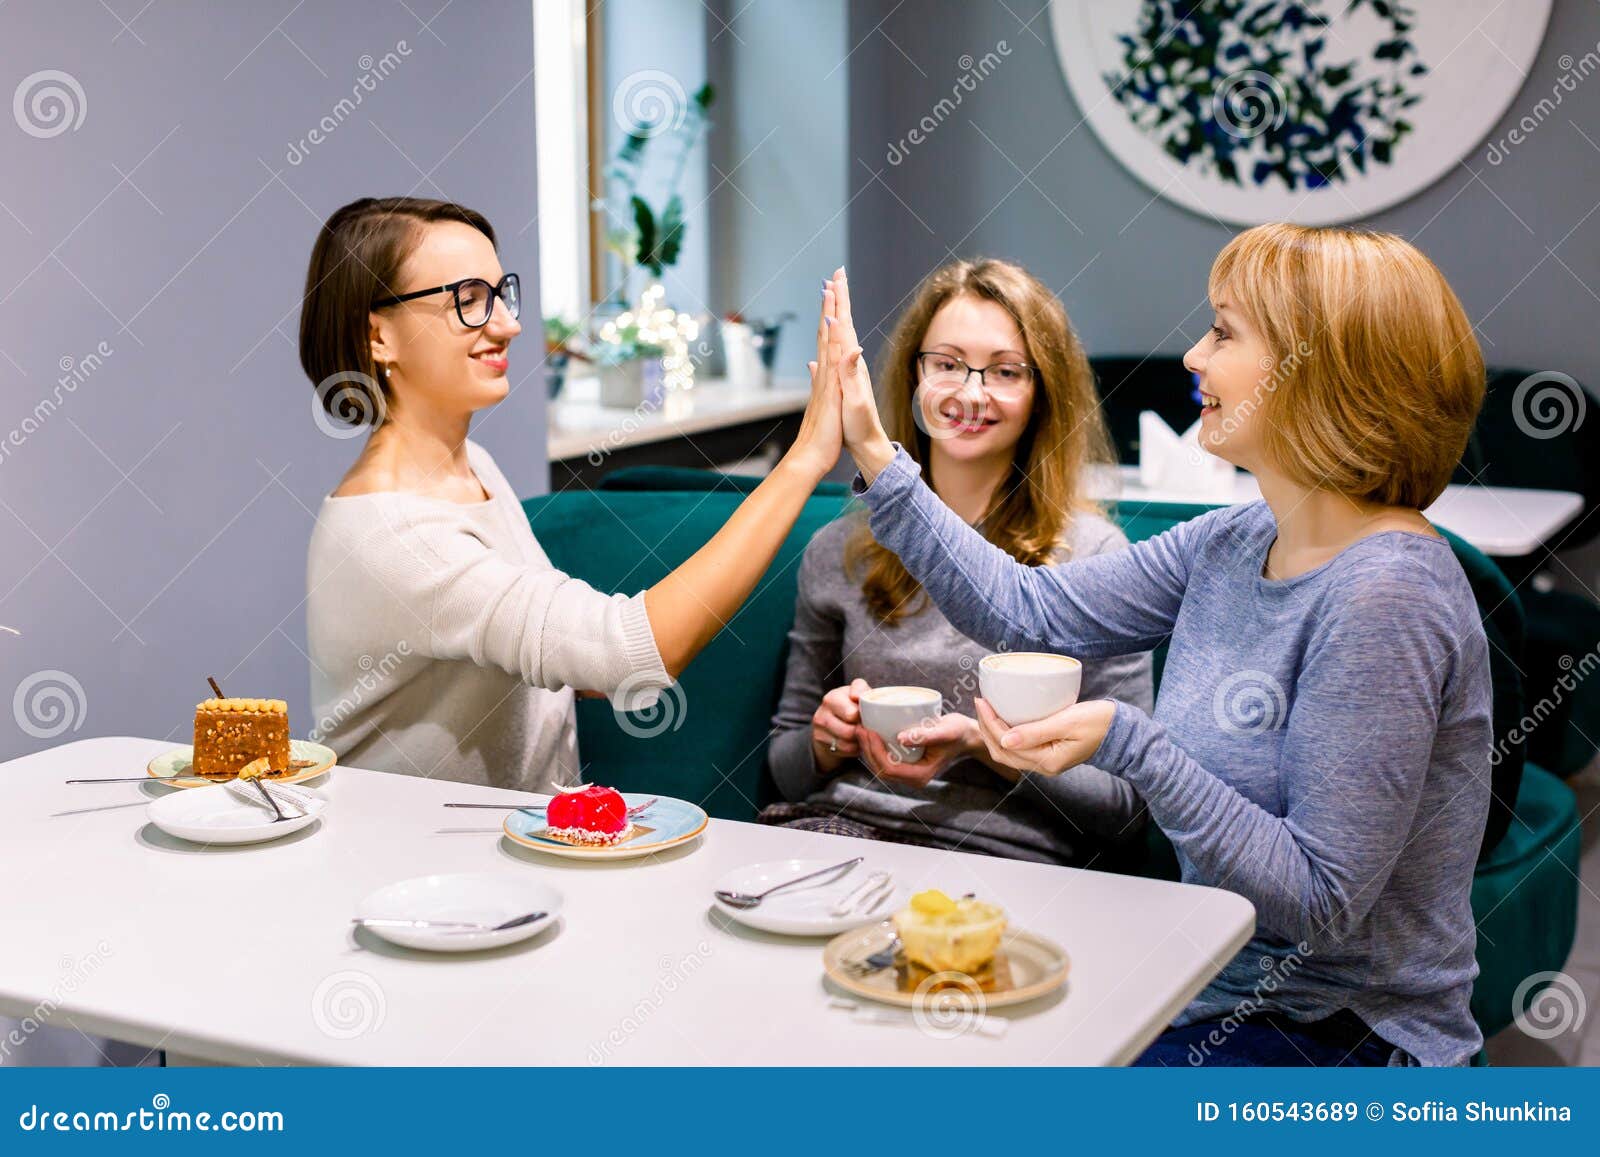 Two Women Giving Five Each Other, Third Woman Holds Stock Image - Image of ...